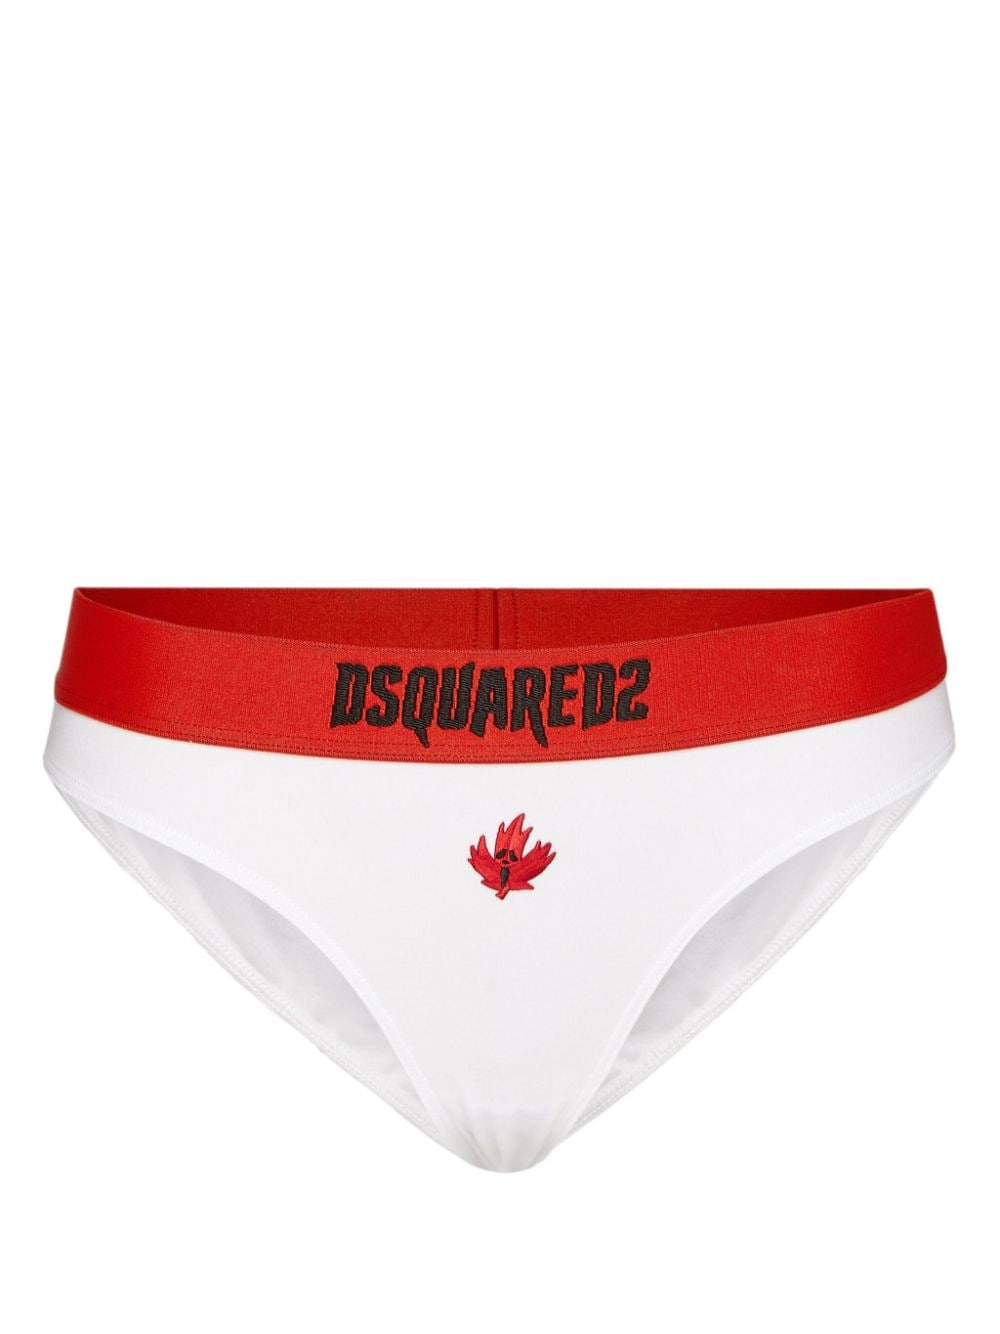 maple leaf-embroidered briefs